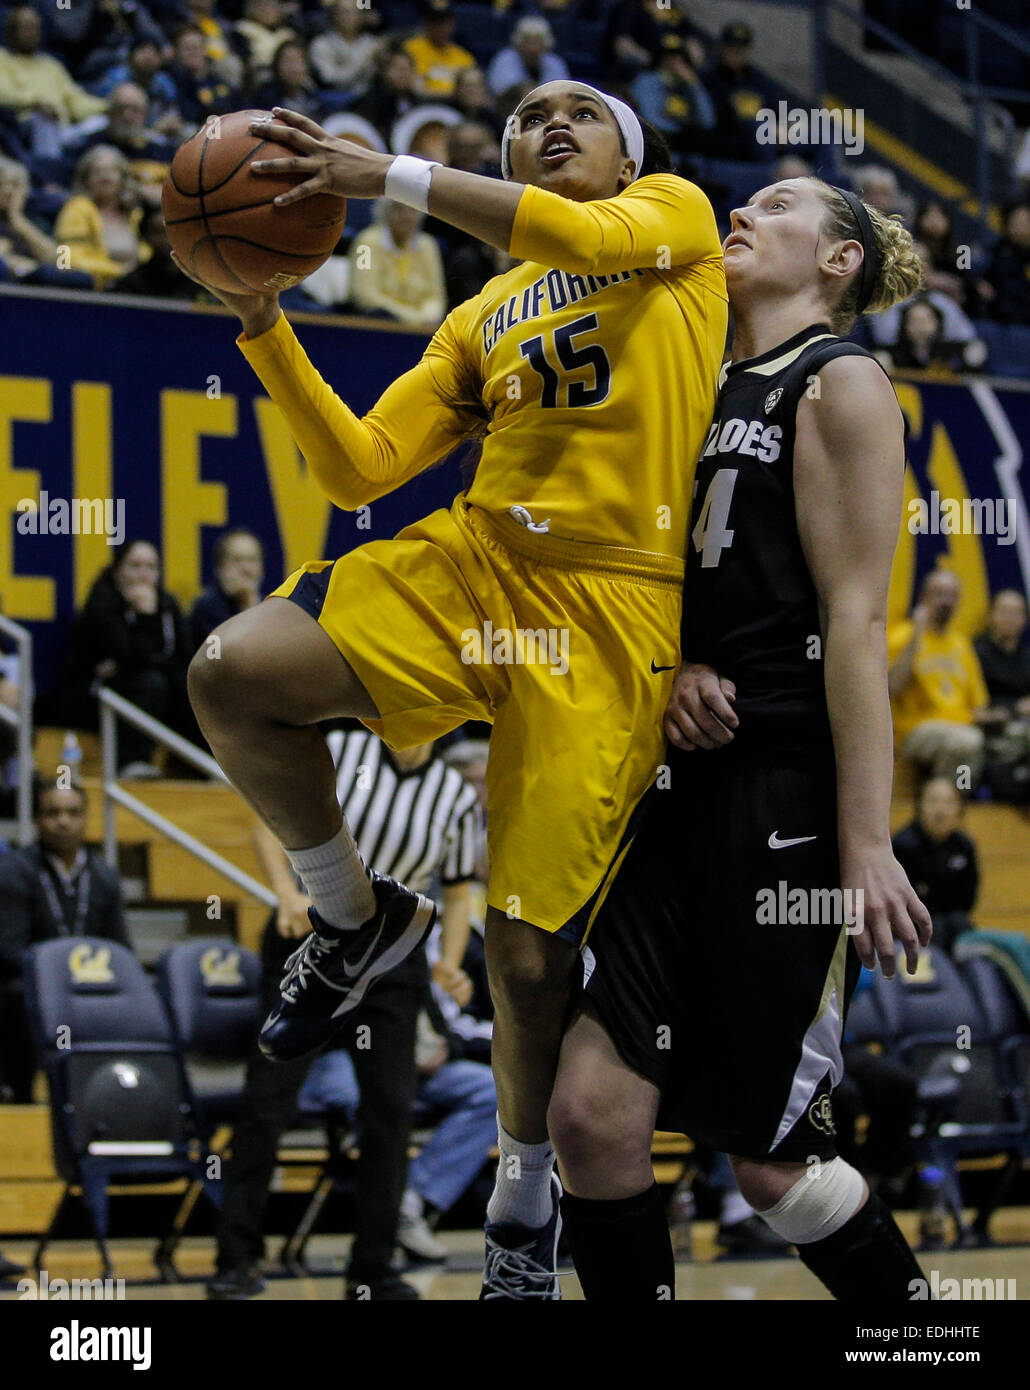 Berkeley CA. 05th Jan, 2015. California G # 15 Brittany Boyd force her way in the paint with a lay up and score during NCAA Women's Basketball game between Colorado Buffaloes and California Golden Bears 75-59 win at Hass Pavilion Berkeley Calif. © csm/Alamy Live News Stock Photo